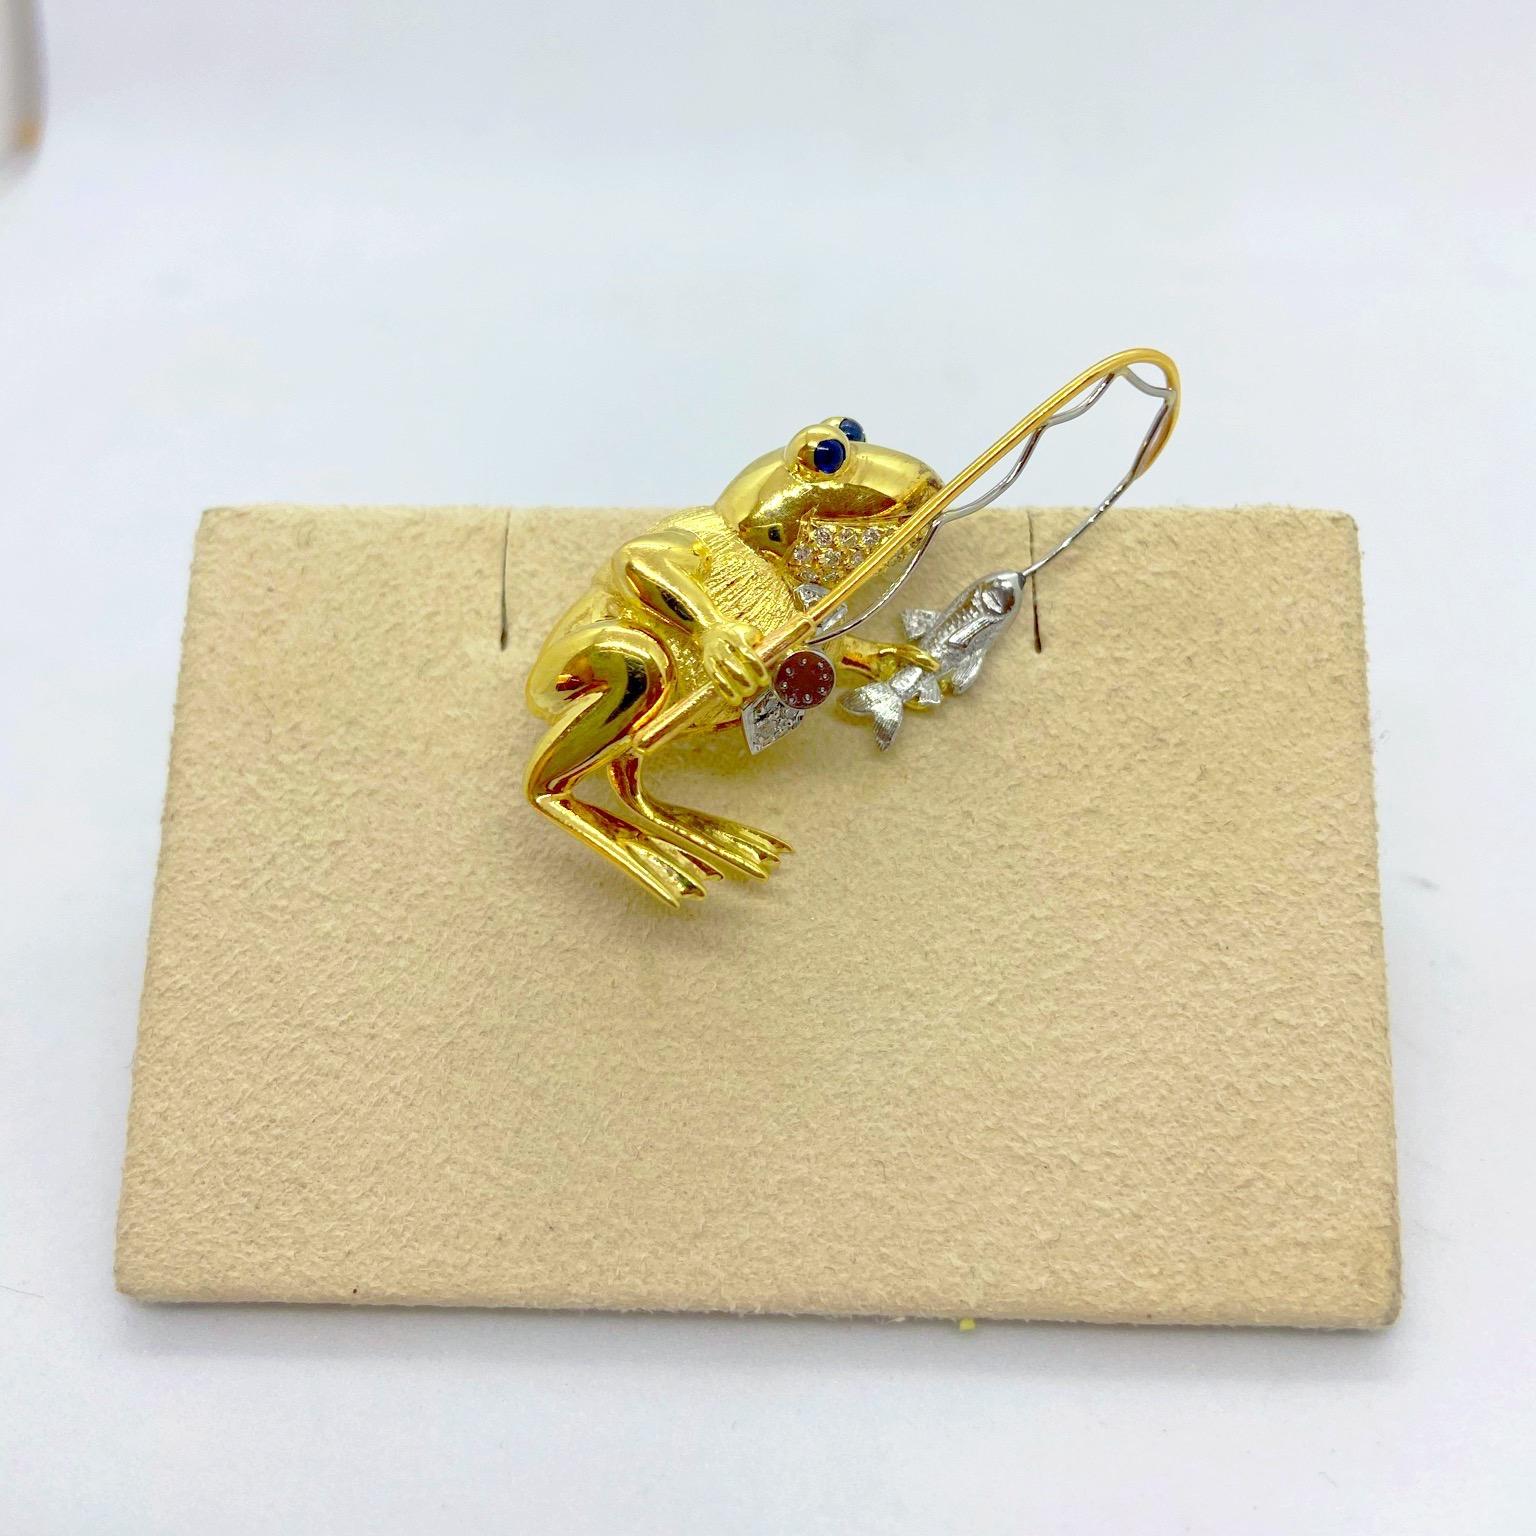 Contemporary E. Wolfe & Co. 18 Karat Yellow and White Gold Frog with a Fishing Pole Brooch For Sale